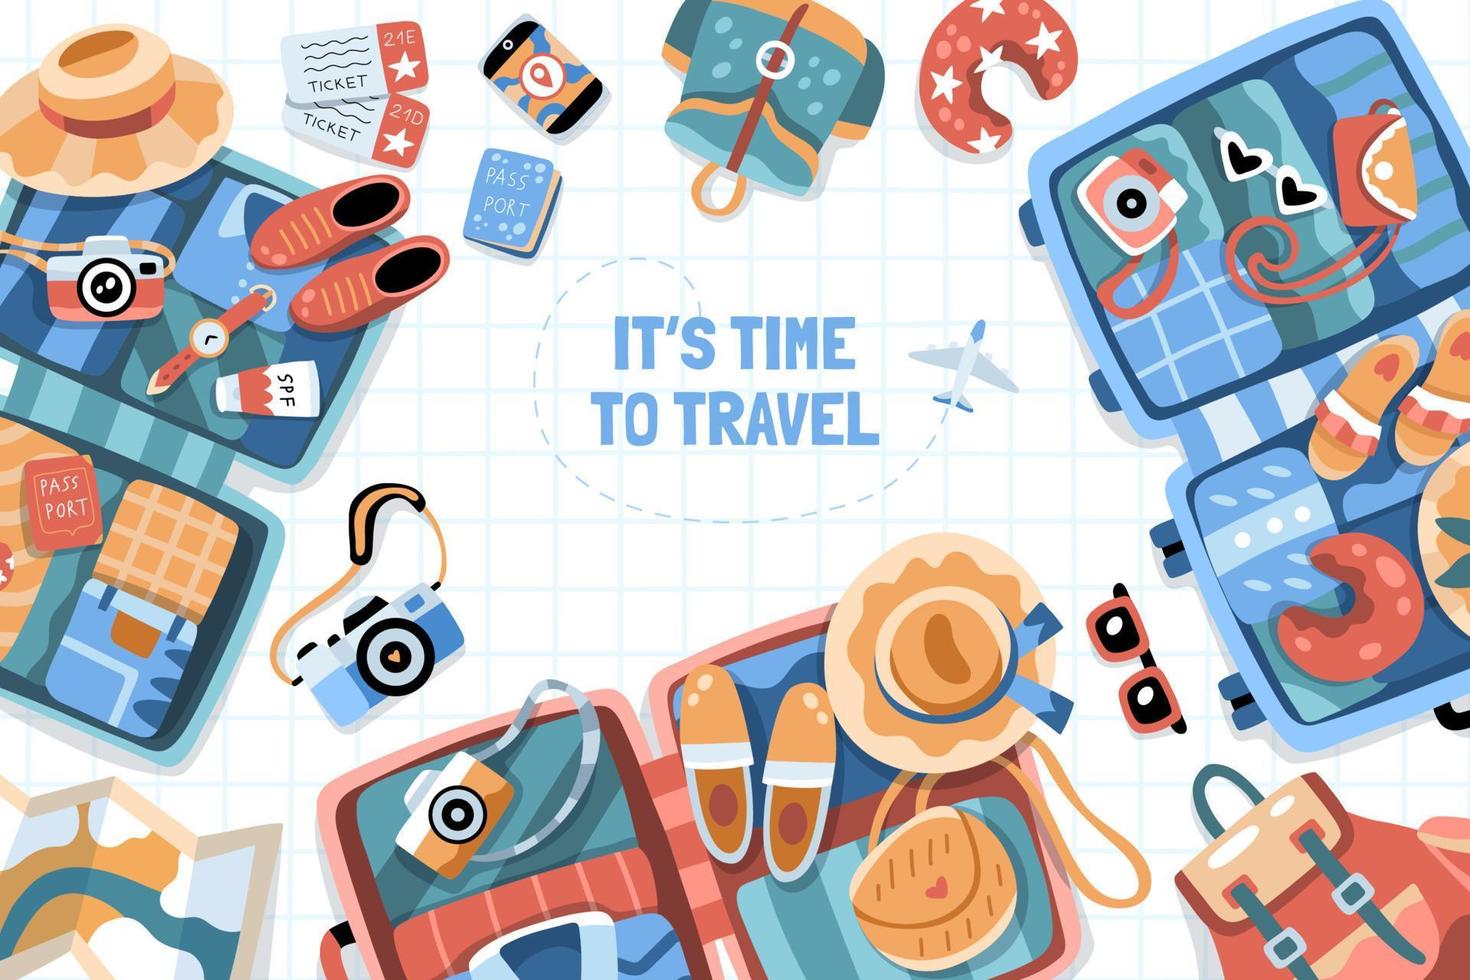 Travel backround with open suitcases and various travel themed objects vector